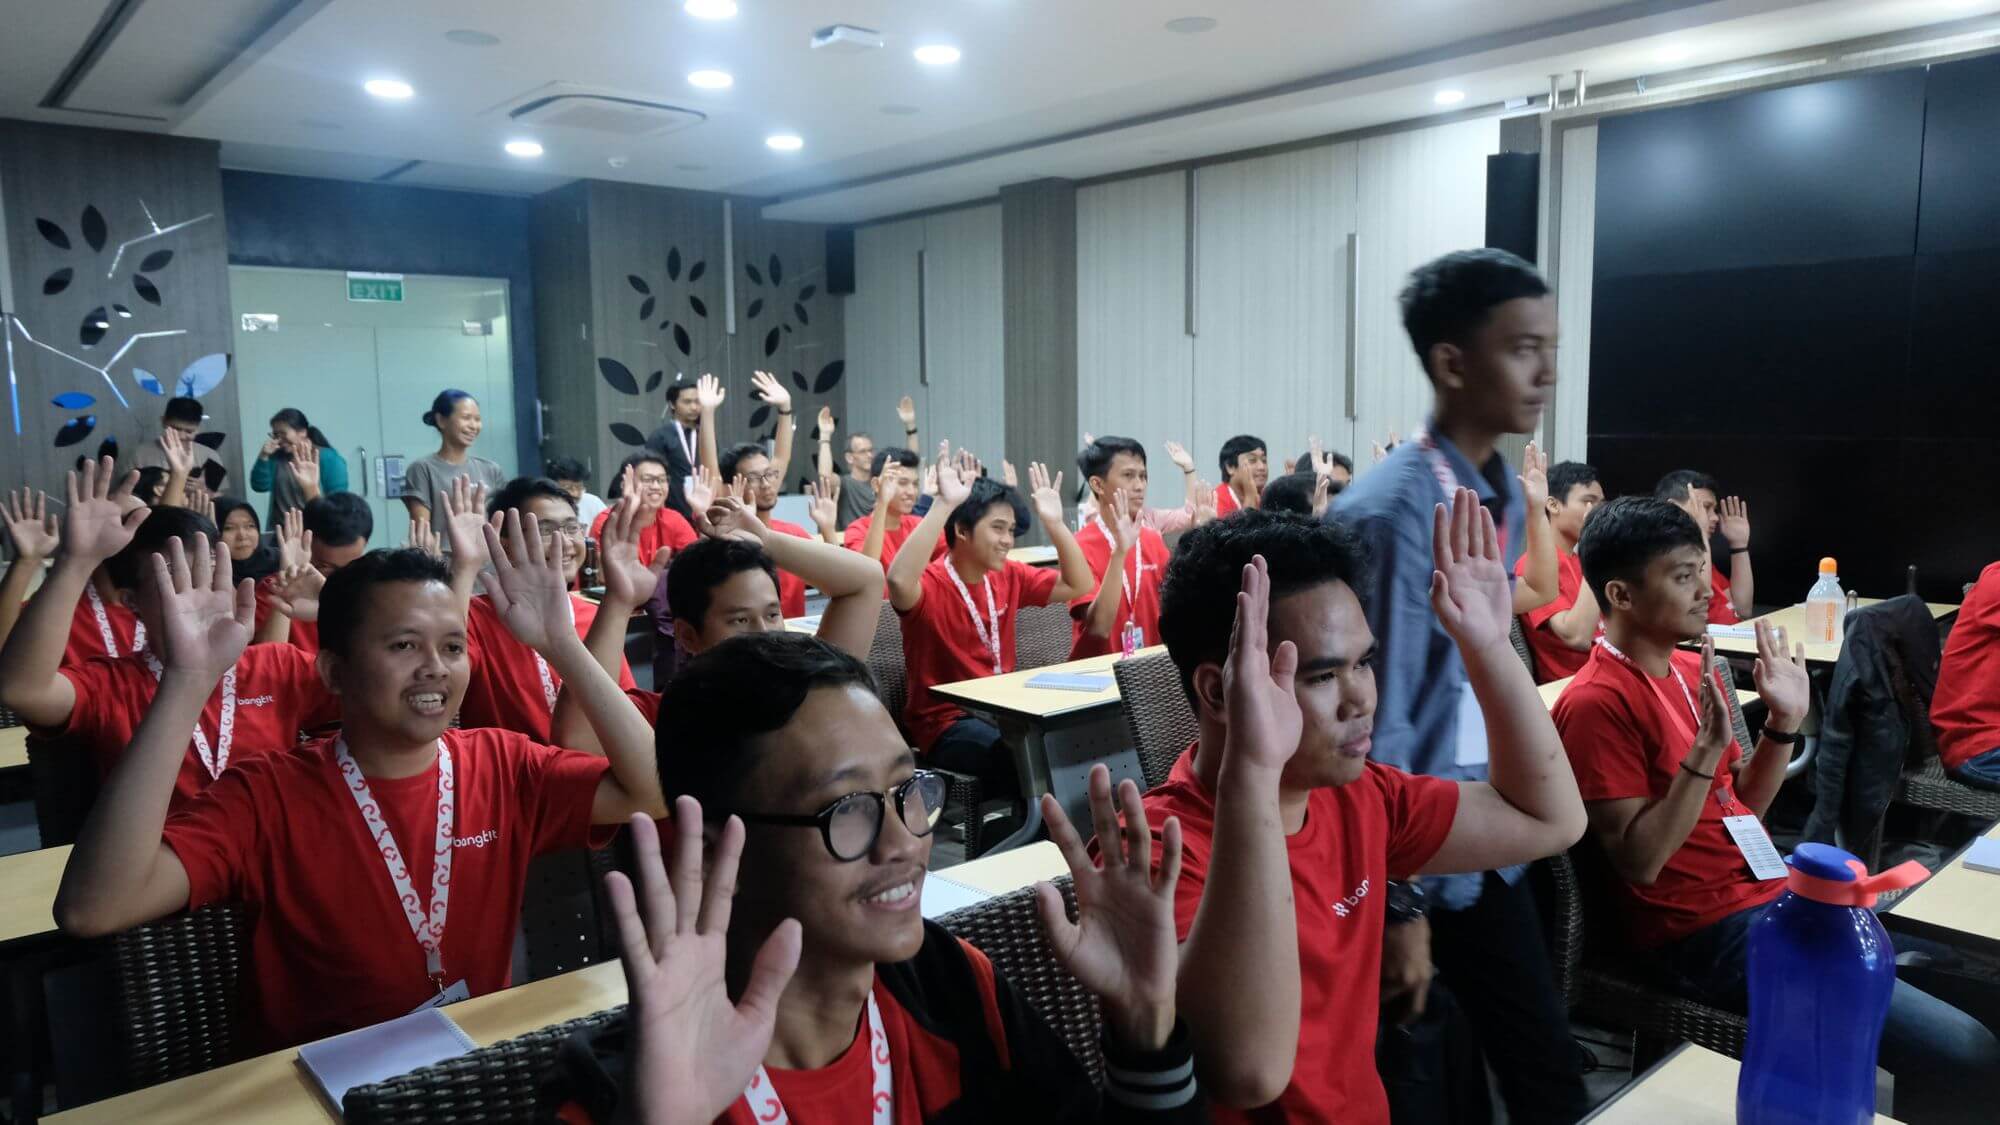 bangkit-how-kalibrr-helped-google-led-educational-initiative-to-connect-indonesian-students-with-tech-opportunities